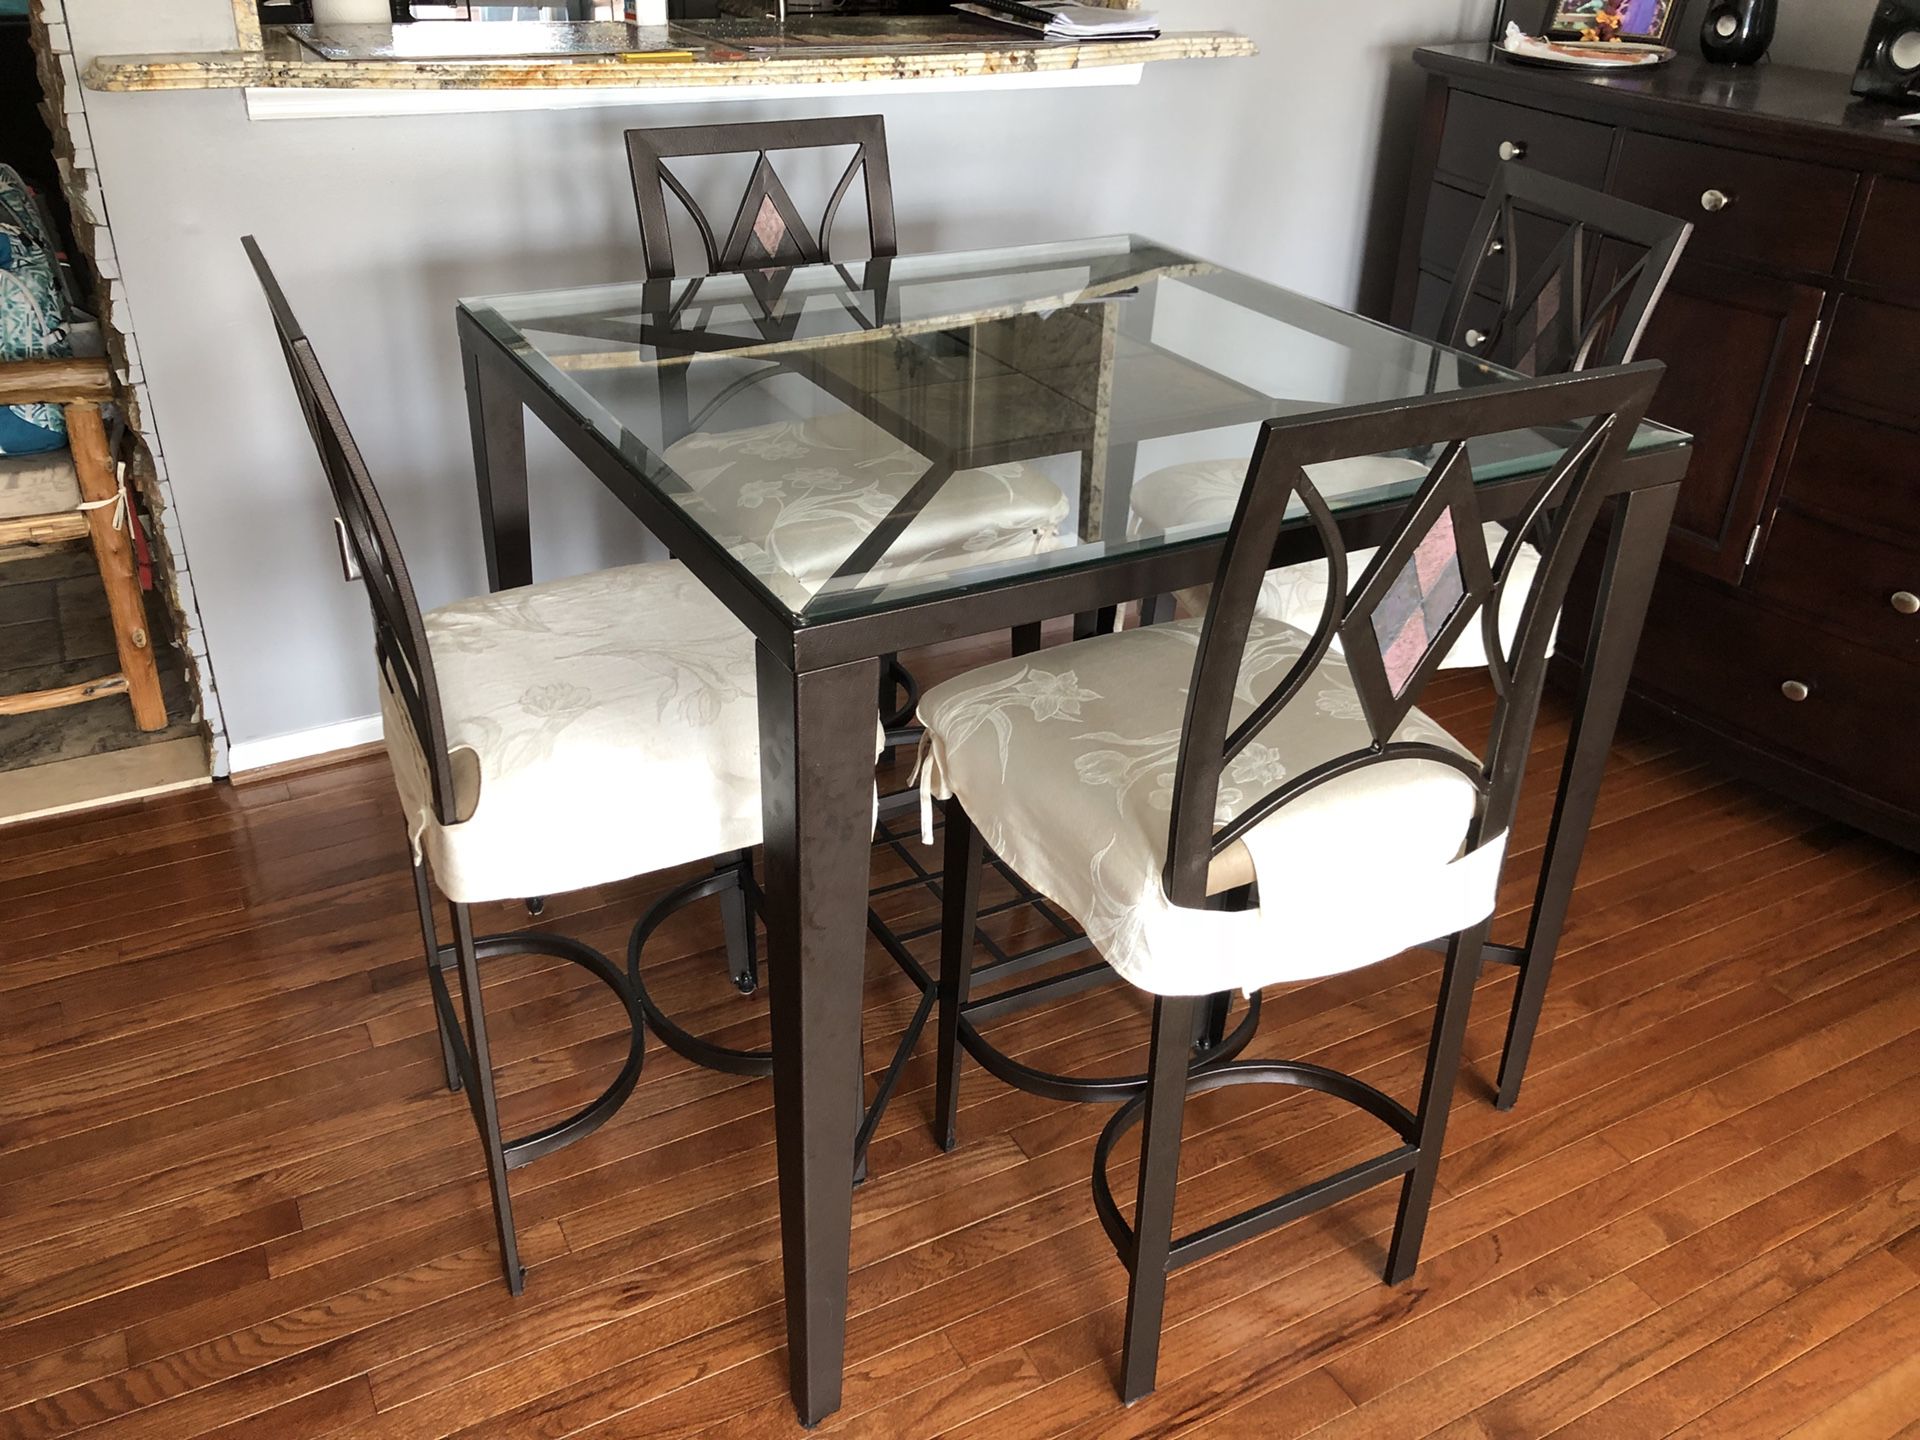 Dinette Square Glass Table With Stone 4 Chair Set